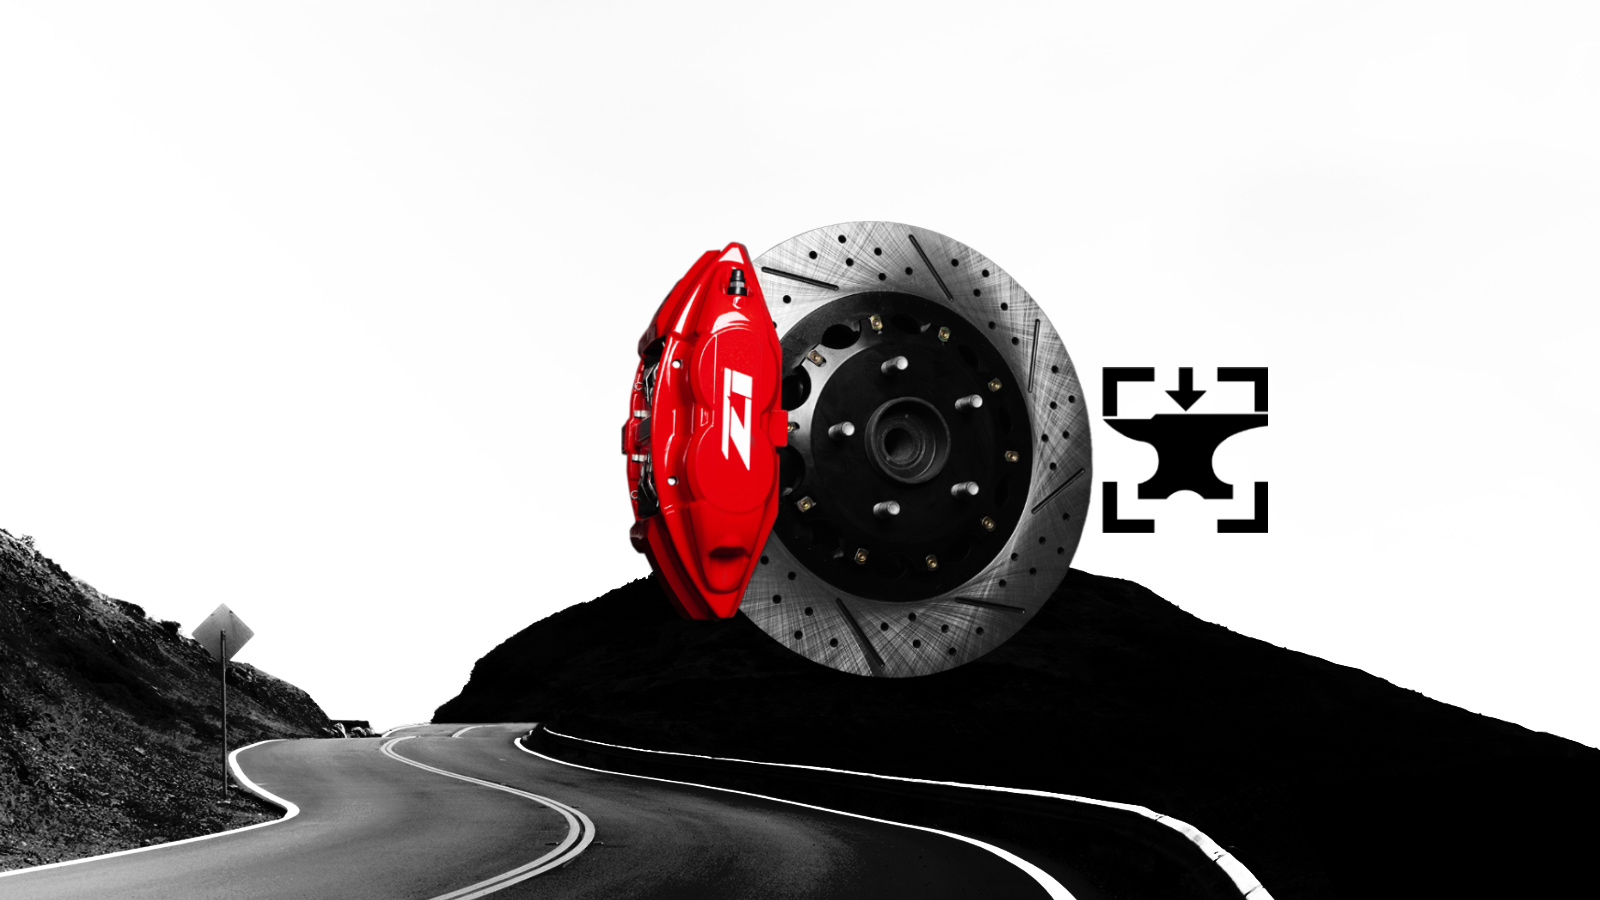 STOPPING POWER Replace your worn out brakes or upgrade for better stopping power